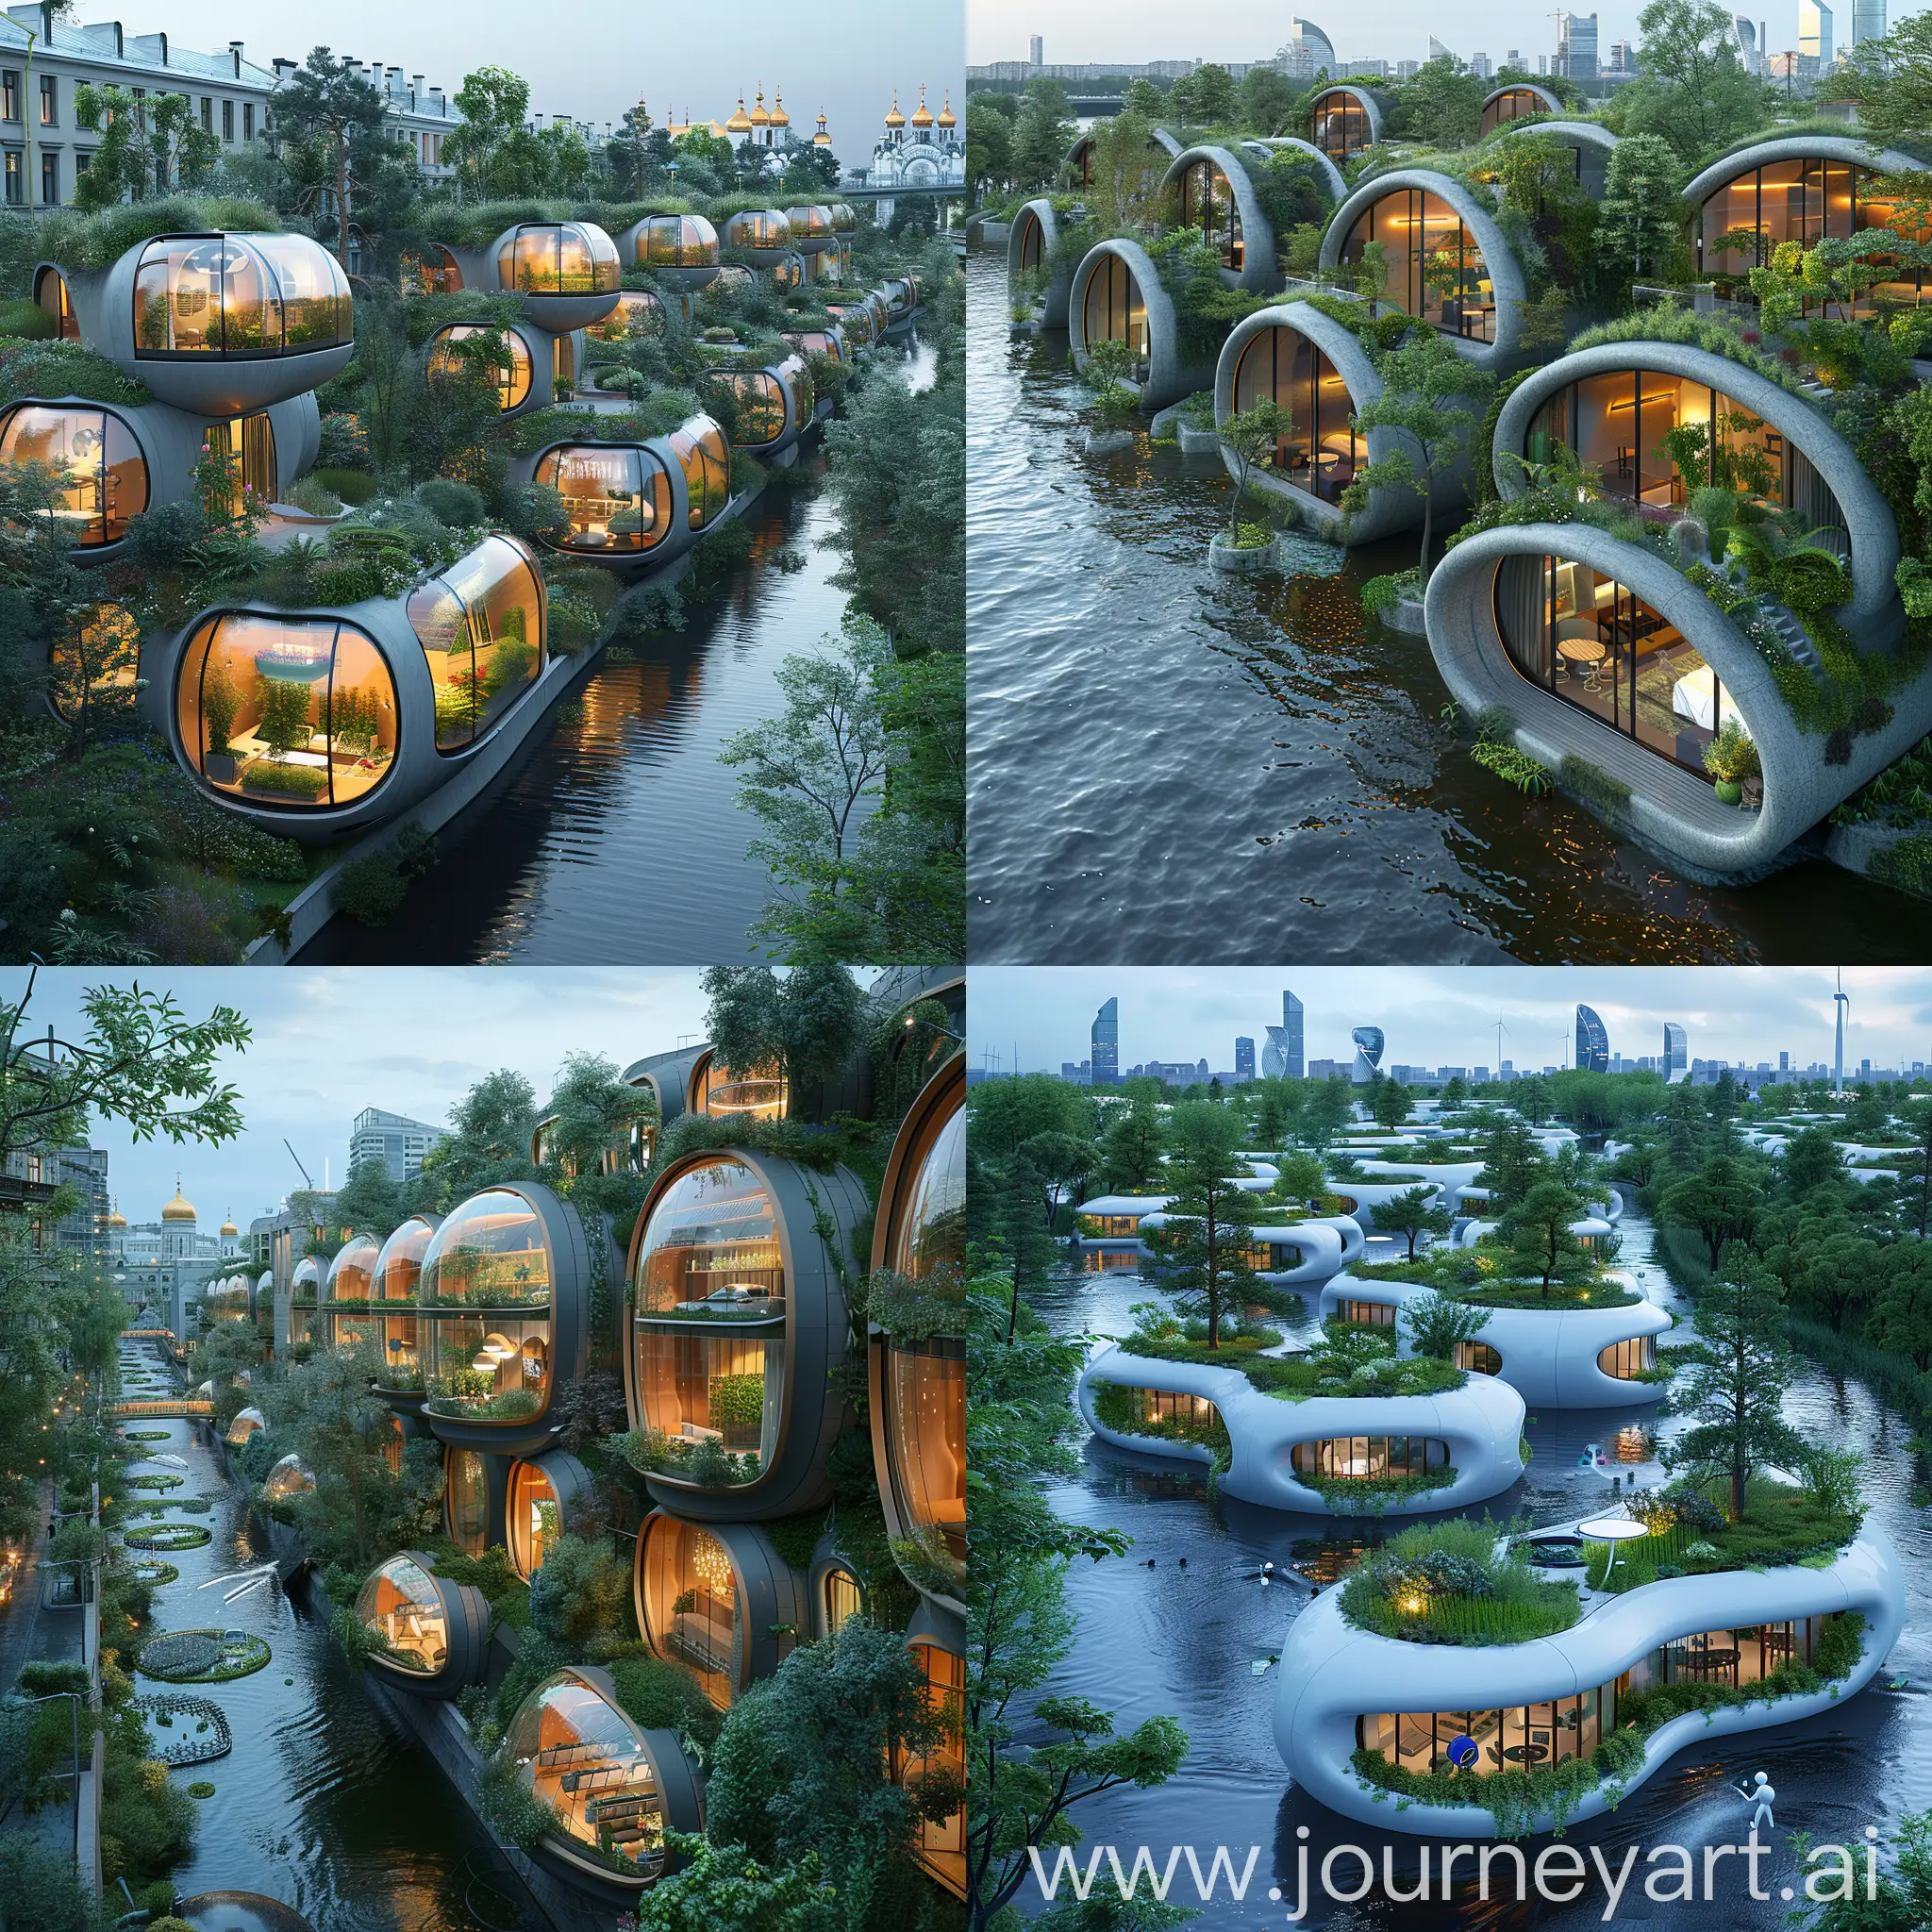 Futuristic-Saint-Petersburg-Sustainable-Urban-Oasis-with-Green-Technology-Marvels